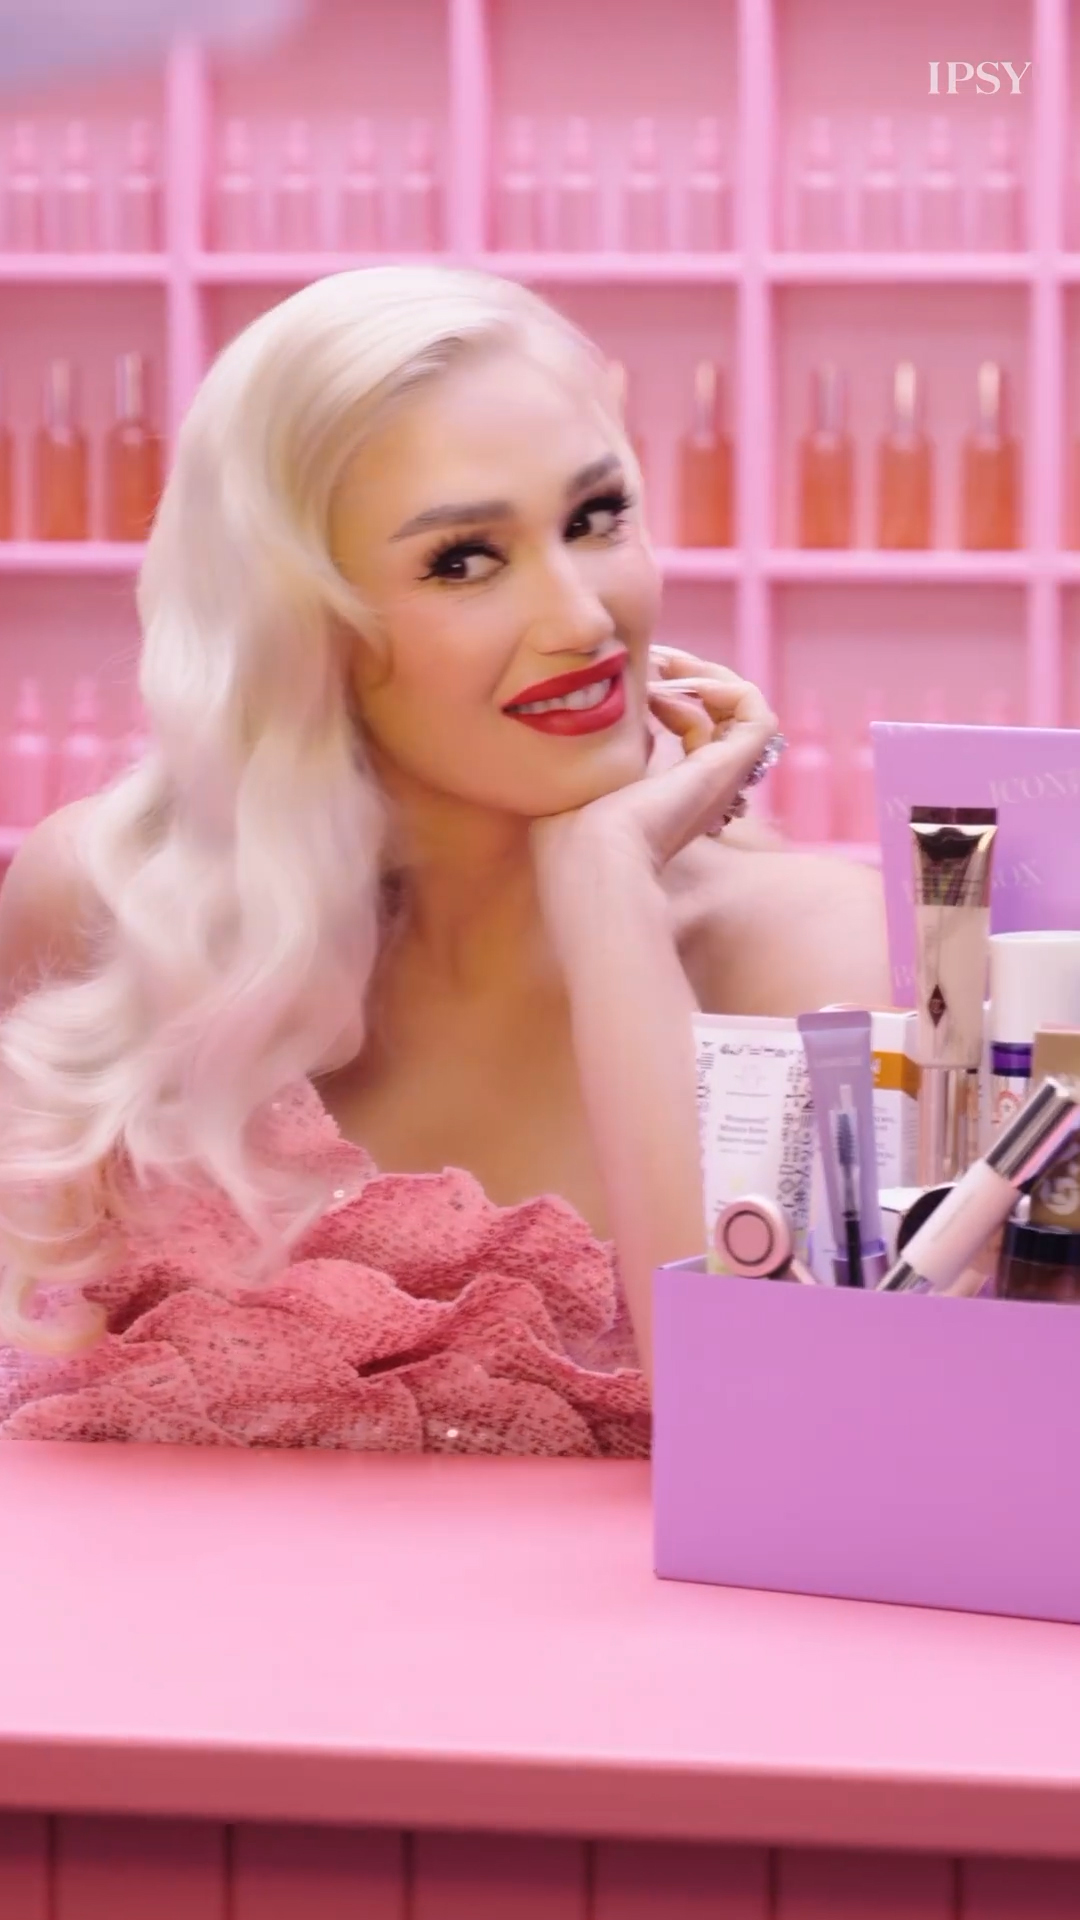 Gwen is also focusing on her other endeavors, including her cosmetics line and upcoming reunion with her former band, No Doubt